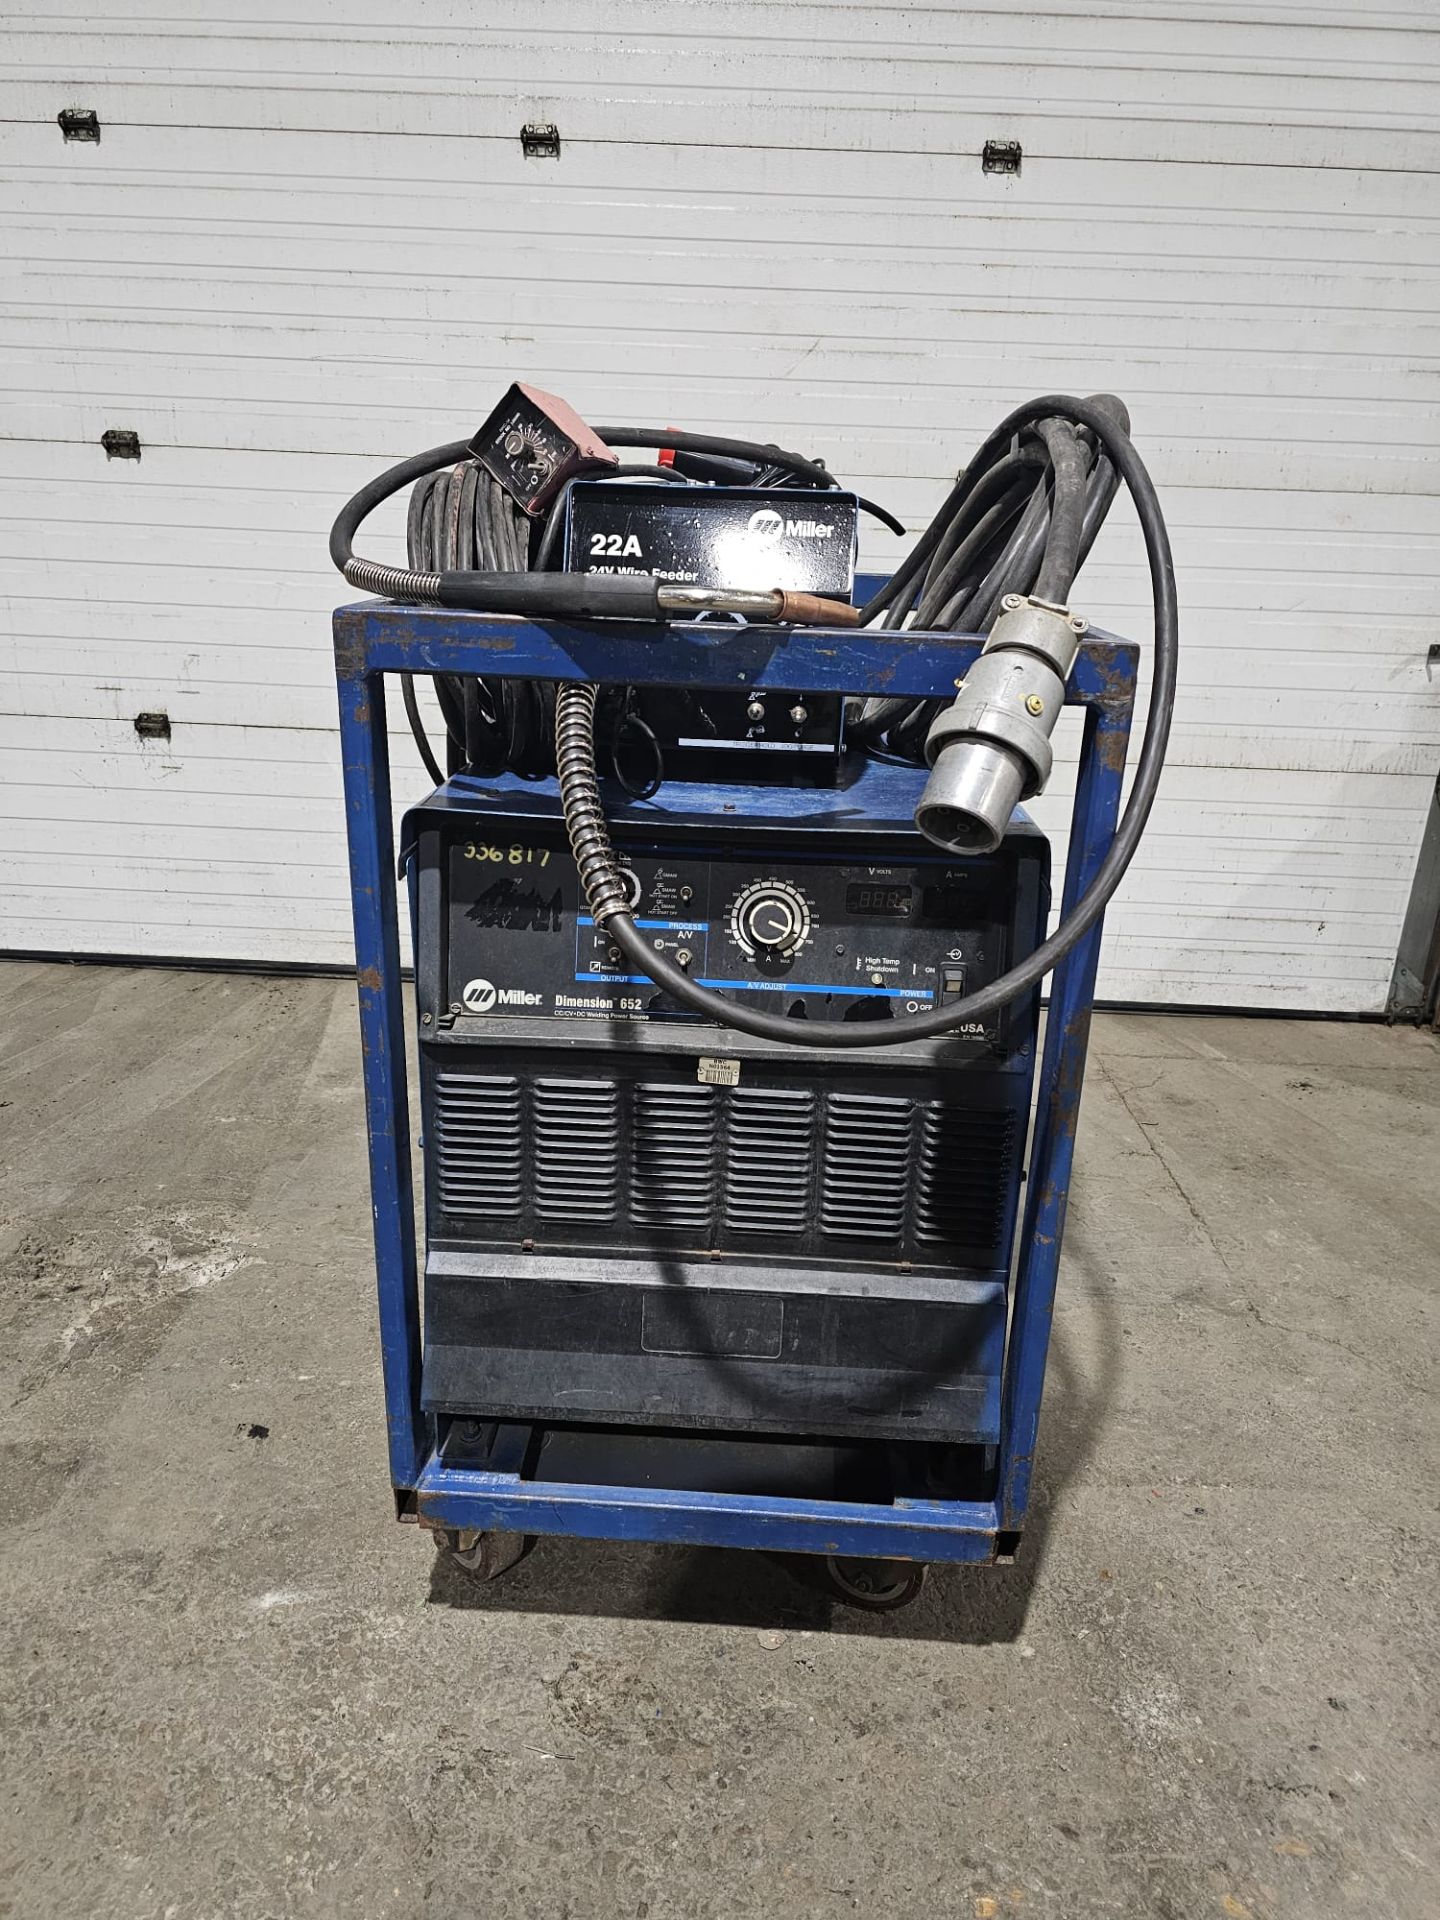 Miller Dimension 652 Mig Welder 650 Amp Mig Tig Stick Multi Process Power Source with 22A Wire - Image 2 of 10